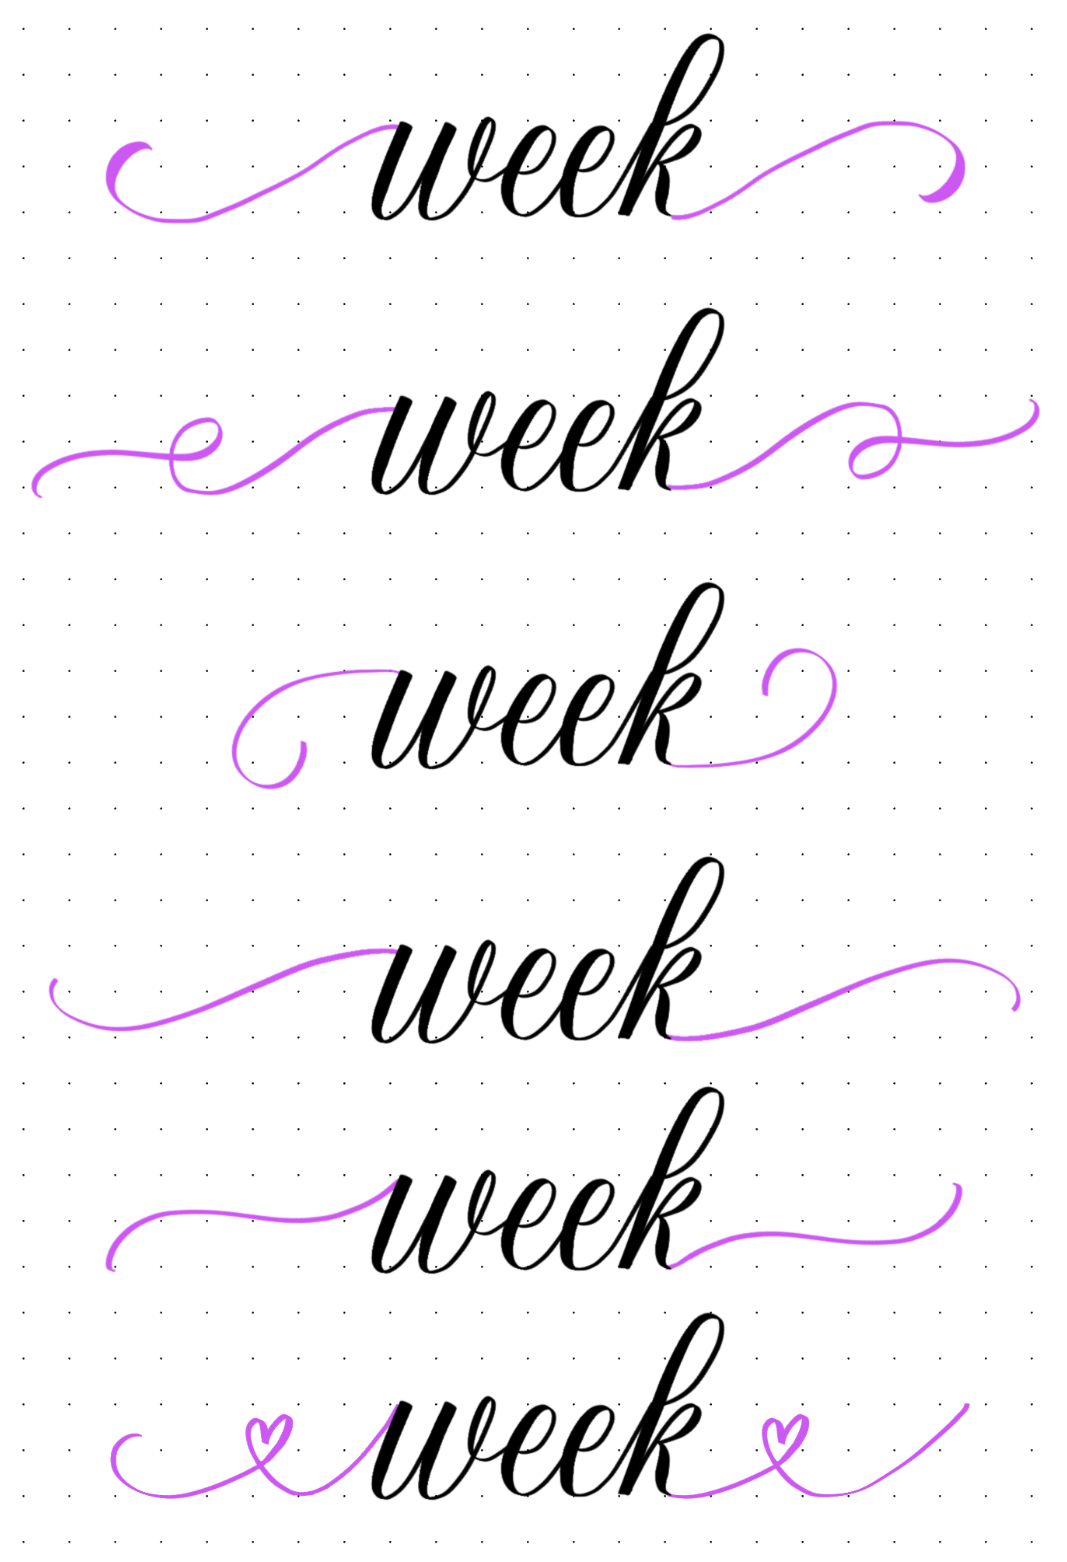 The word week written in calligraphy and flourished 6 ways